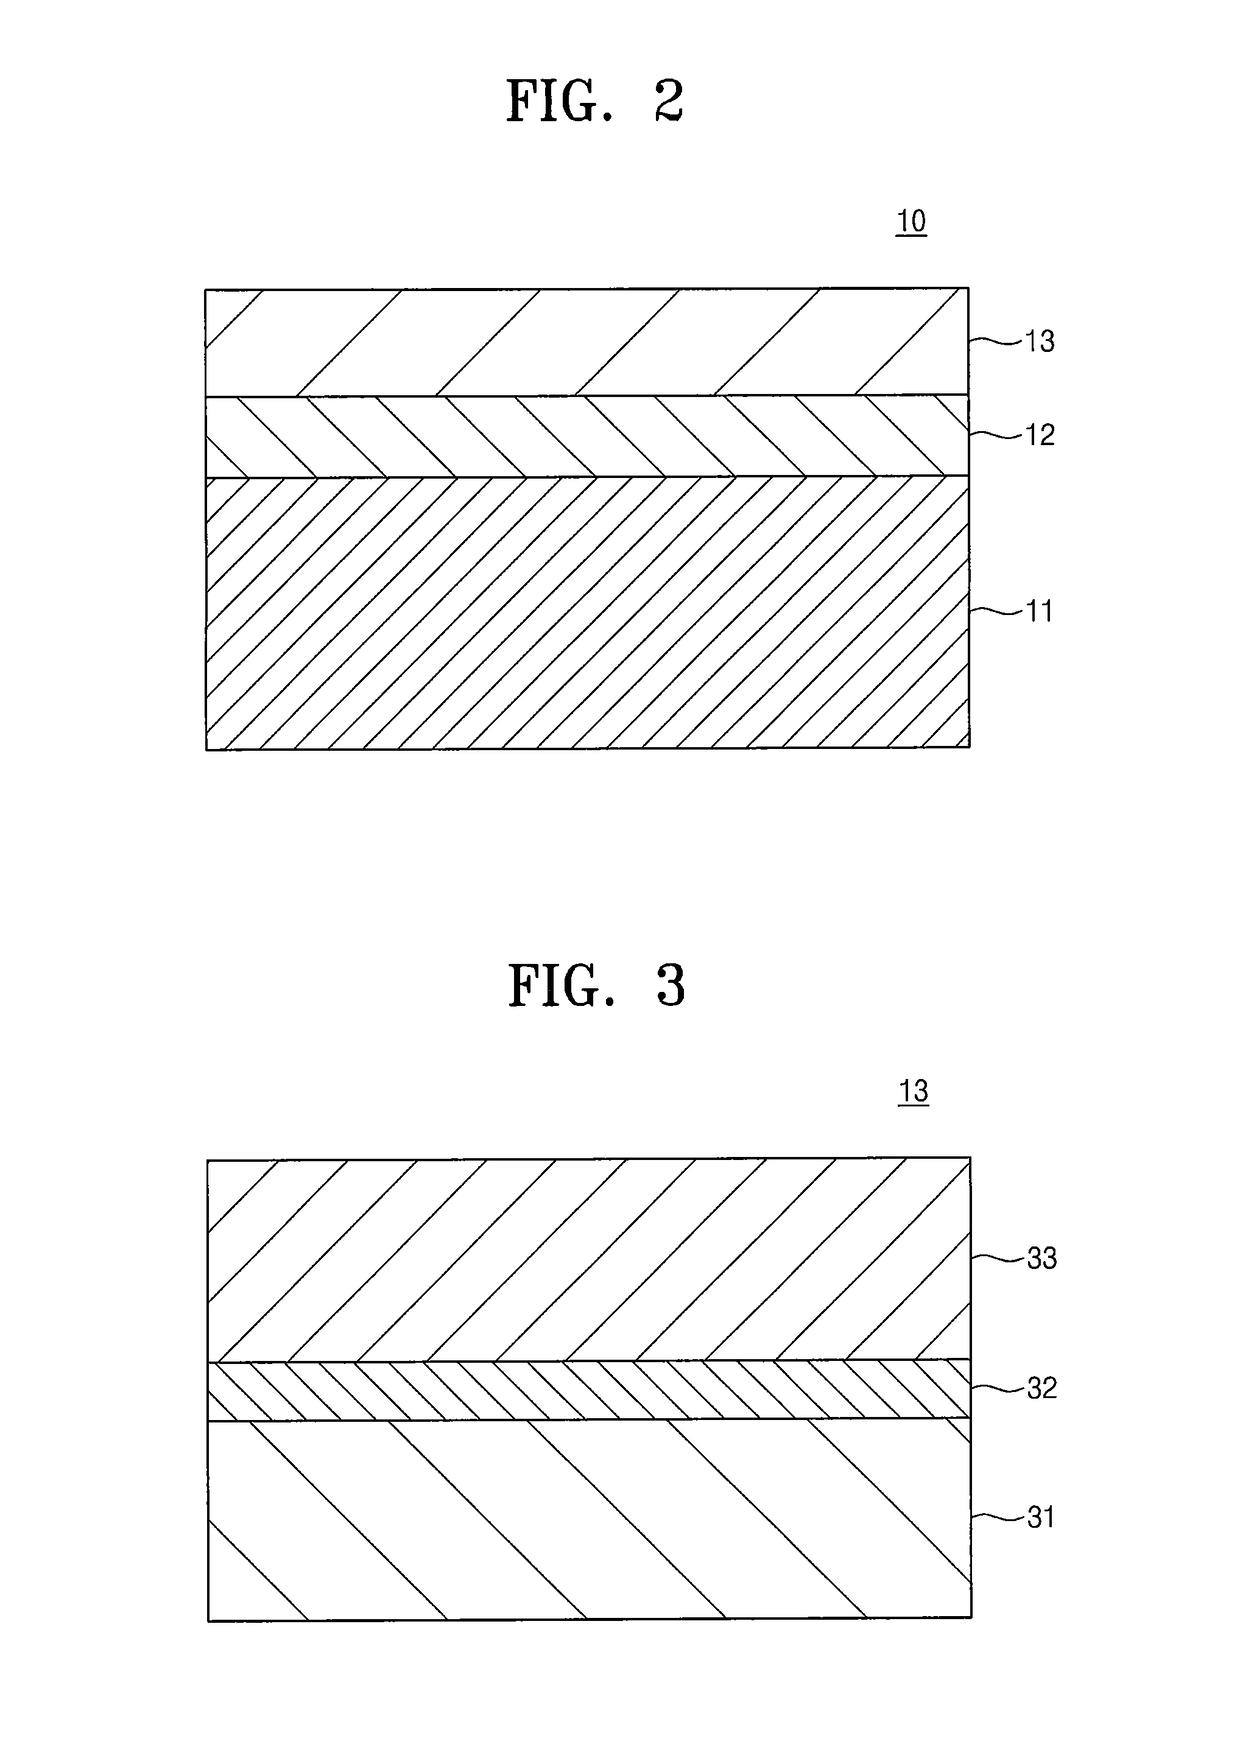 Magneto-resistive devices including a free layer having different magnetic properties during operations